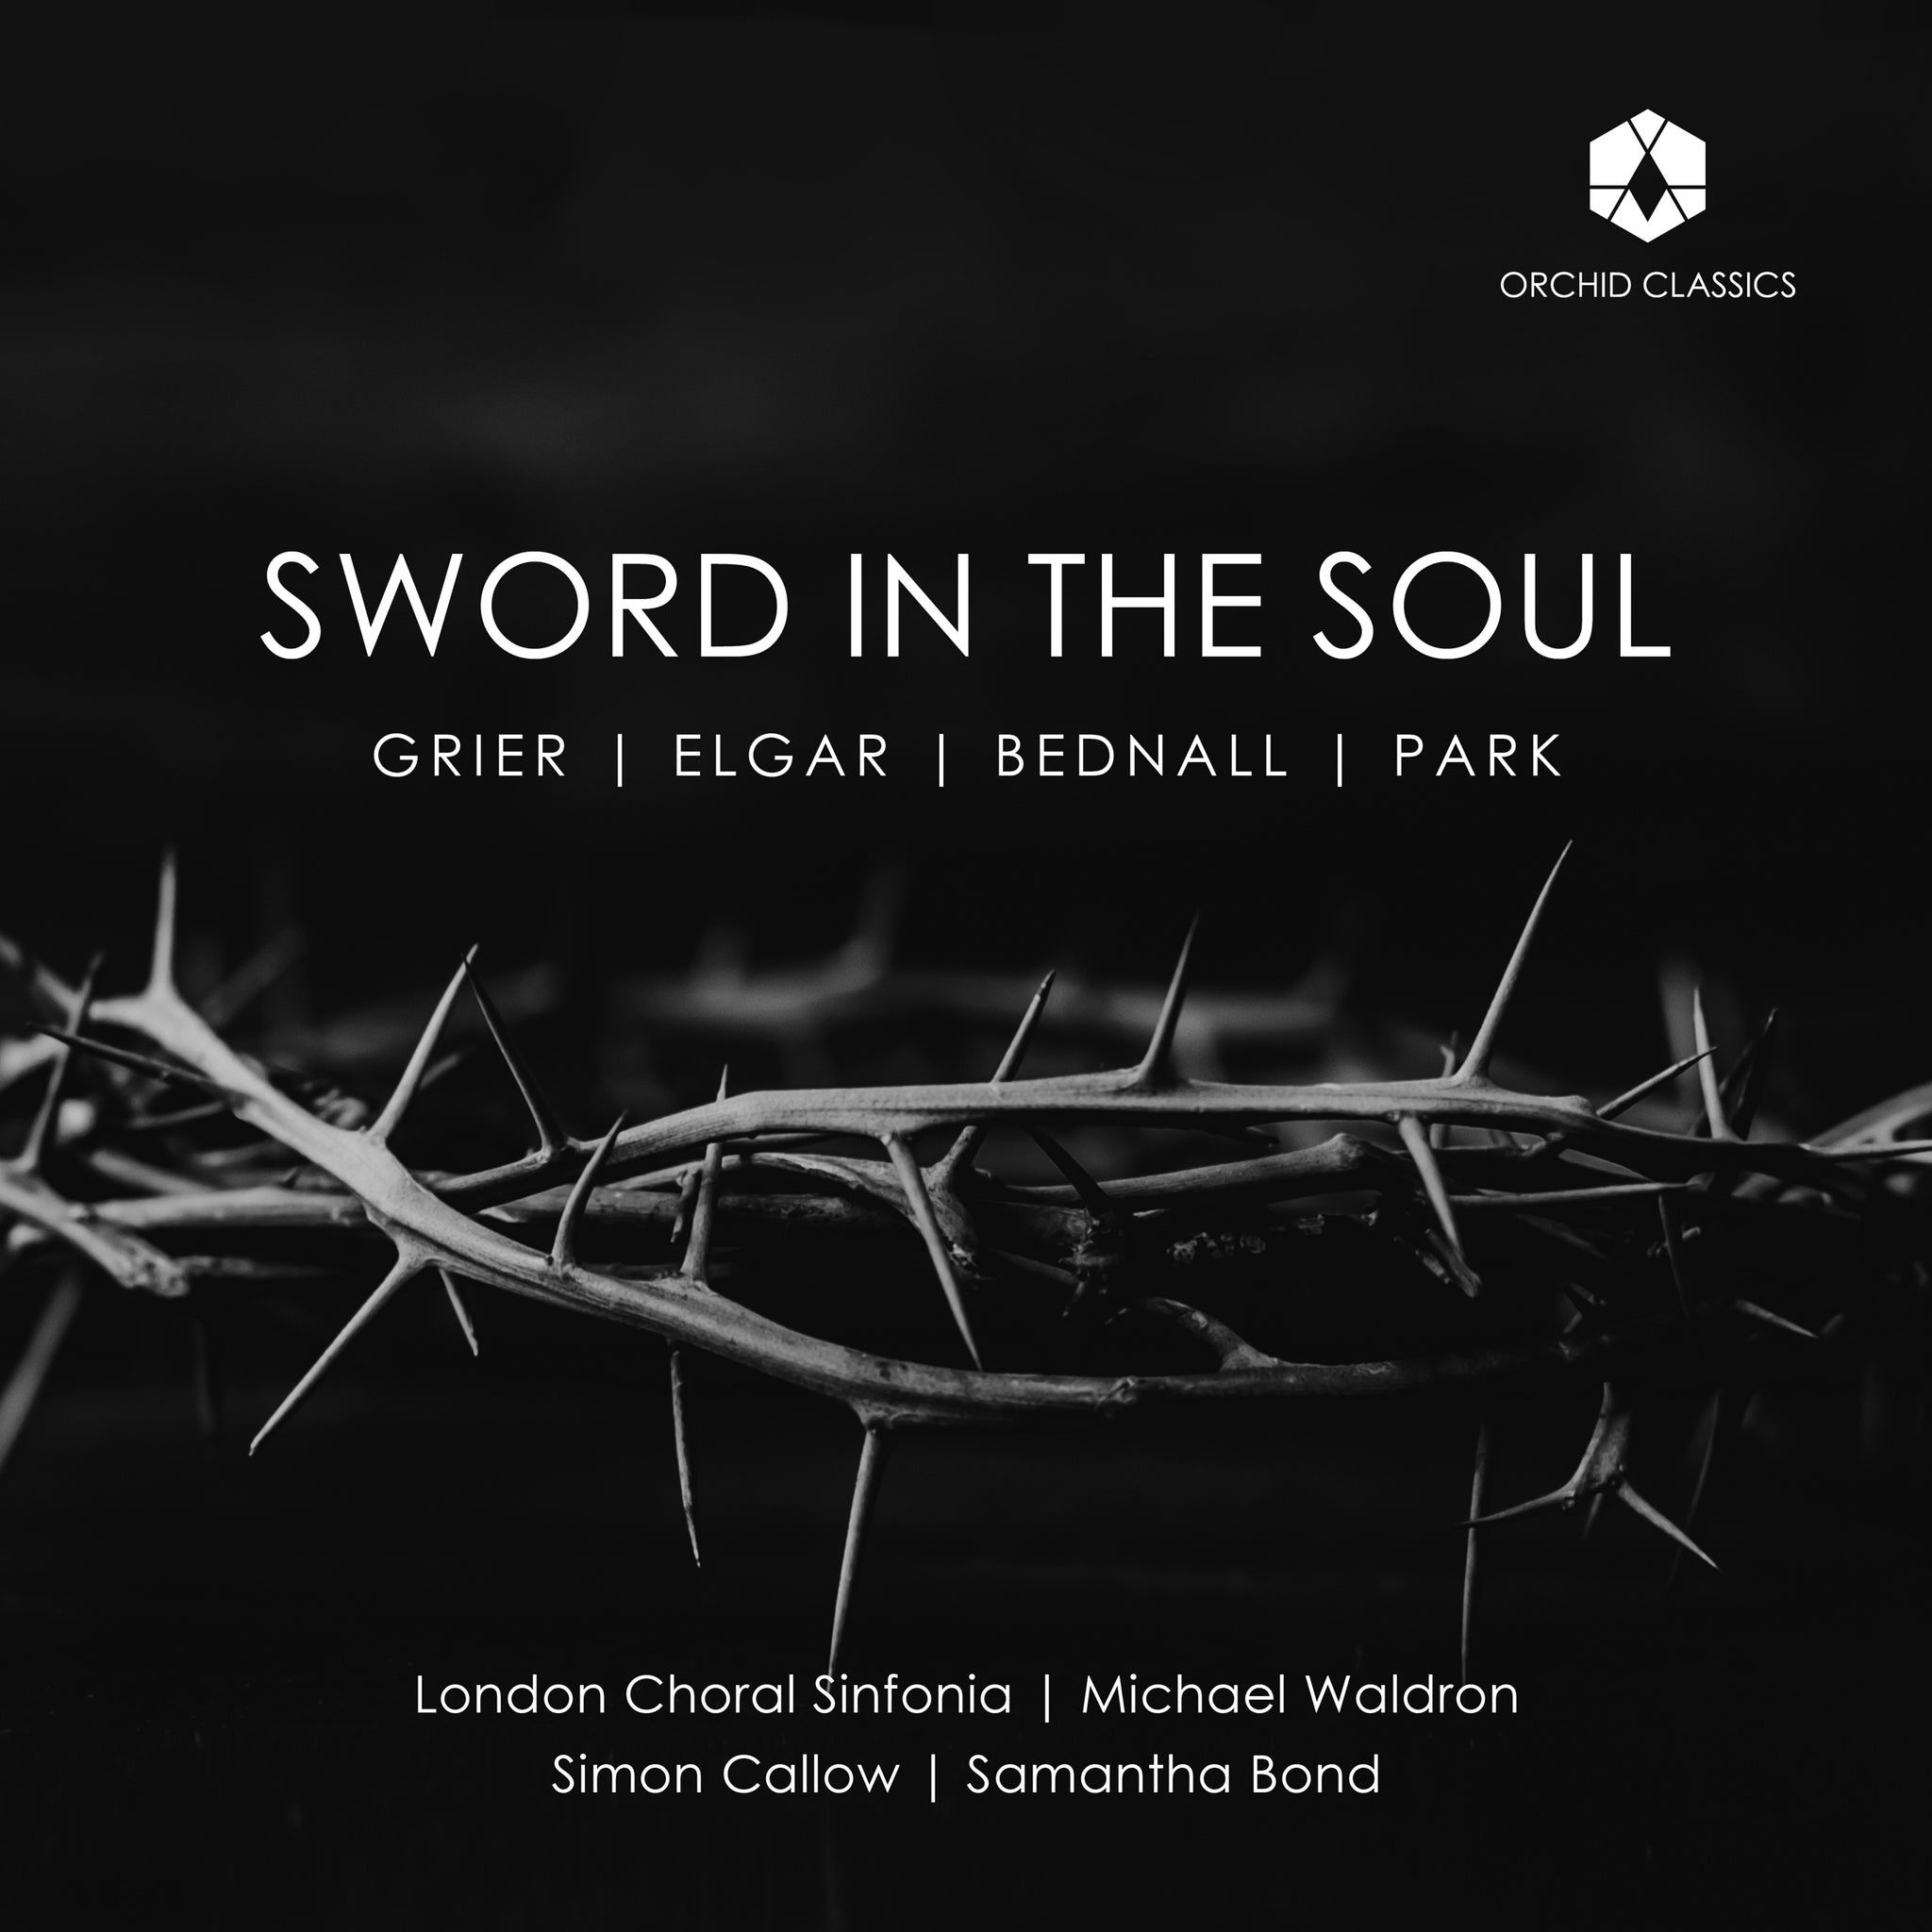 Sword in the Soul / Waldron, London Choral Sinfonia